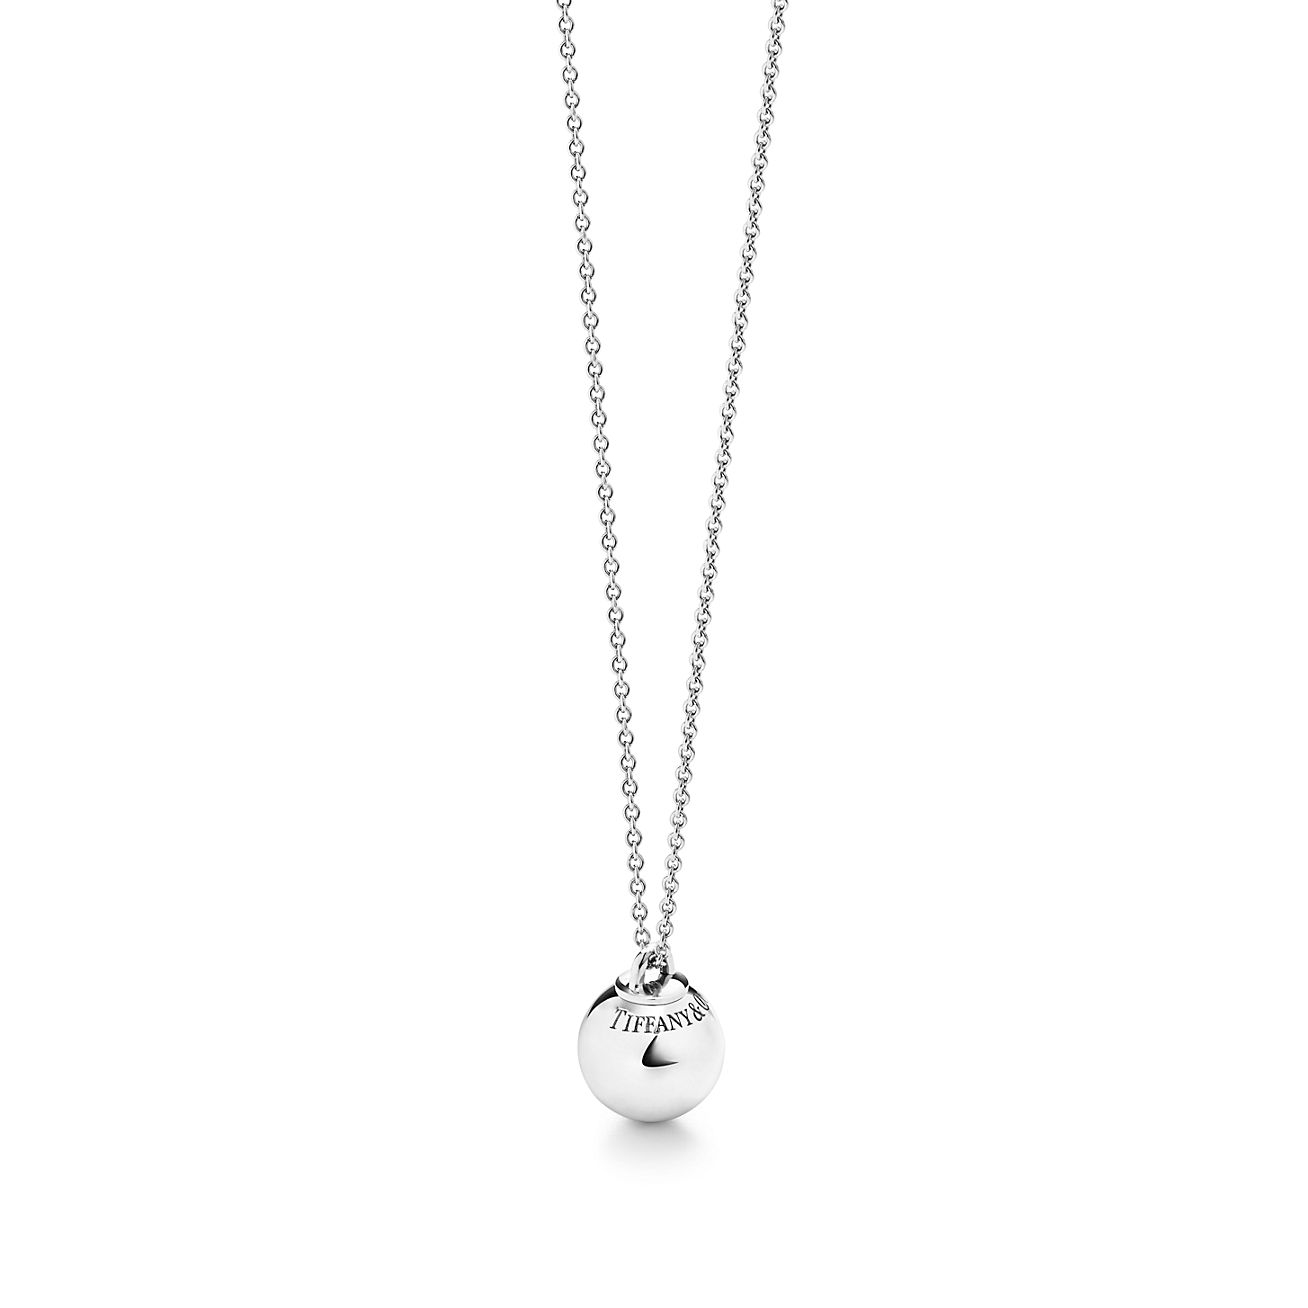 silverball necklace